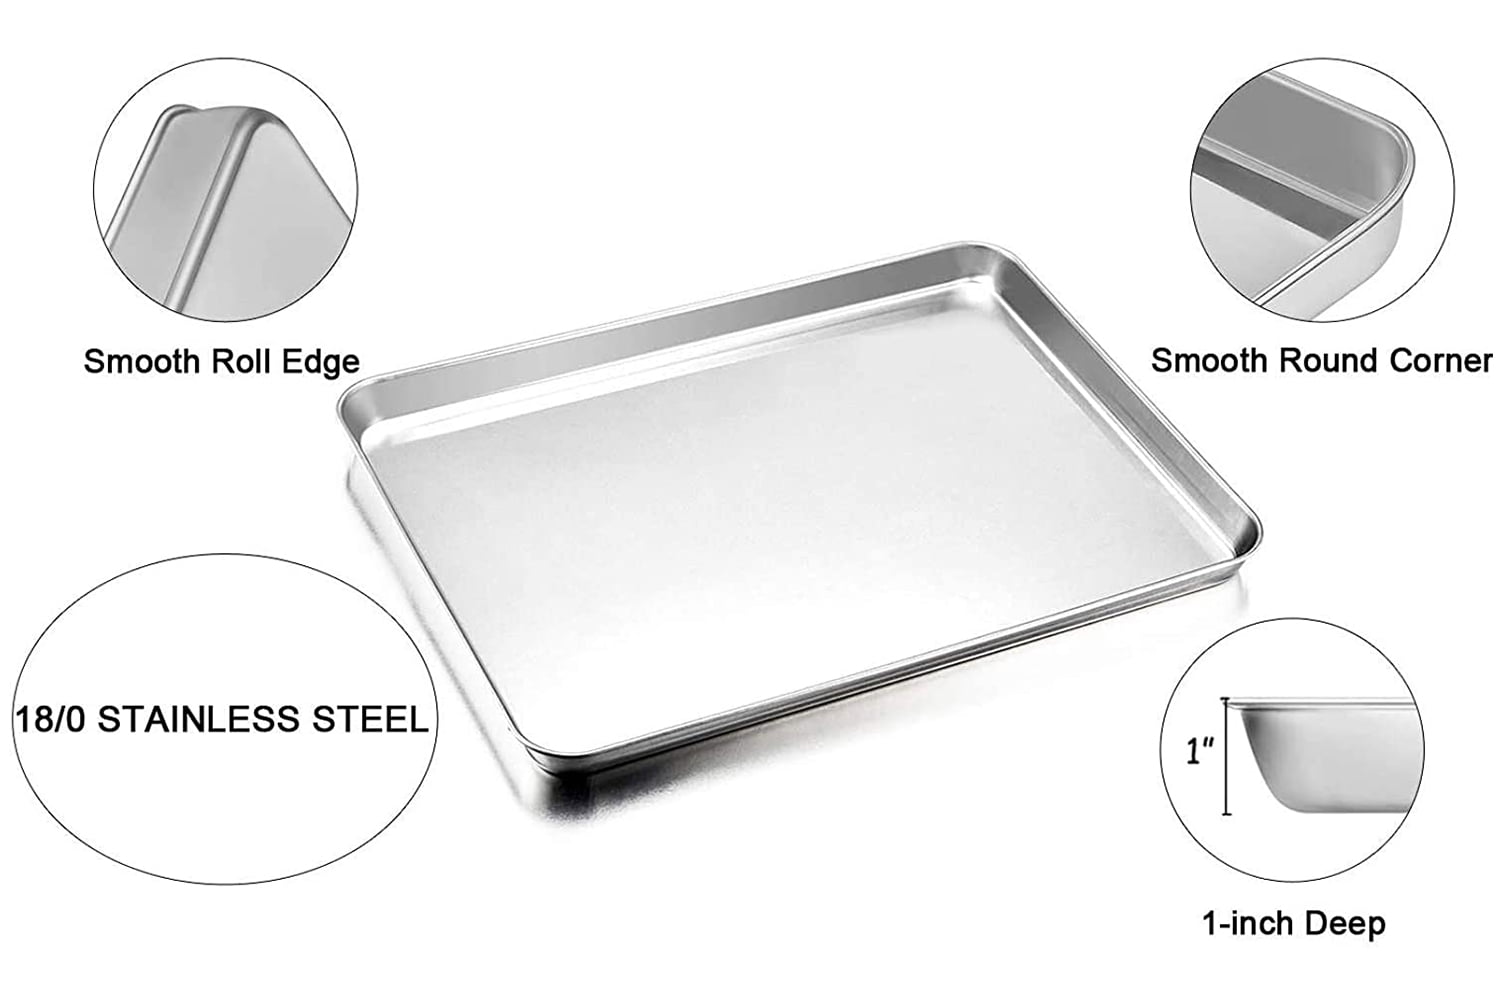 Wildone Baking Sheet & Rack Set 2 Sheets + 2 Racks Stainless Steel Cookie Pan with Cooling Rack Size 16 x 12 x 1 inch Non Toxic & Heavy Duty 